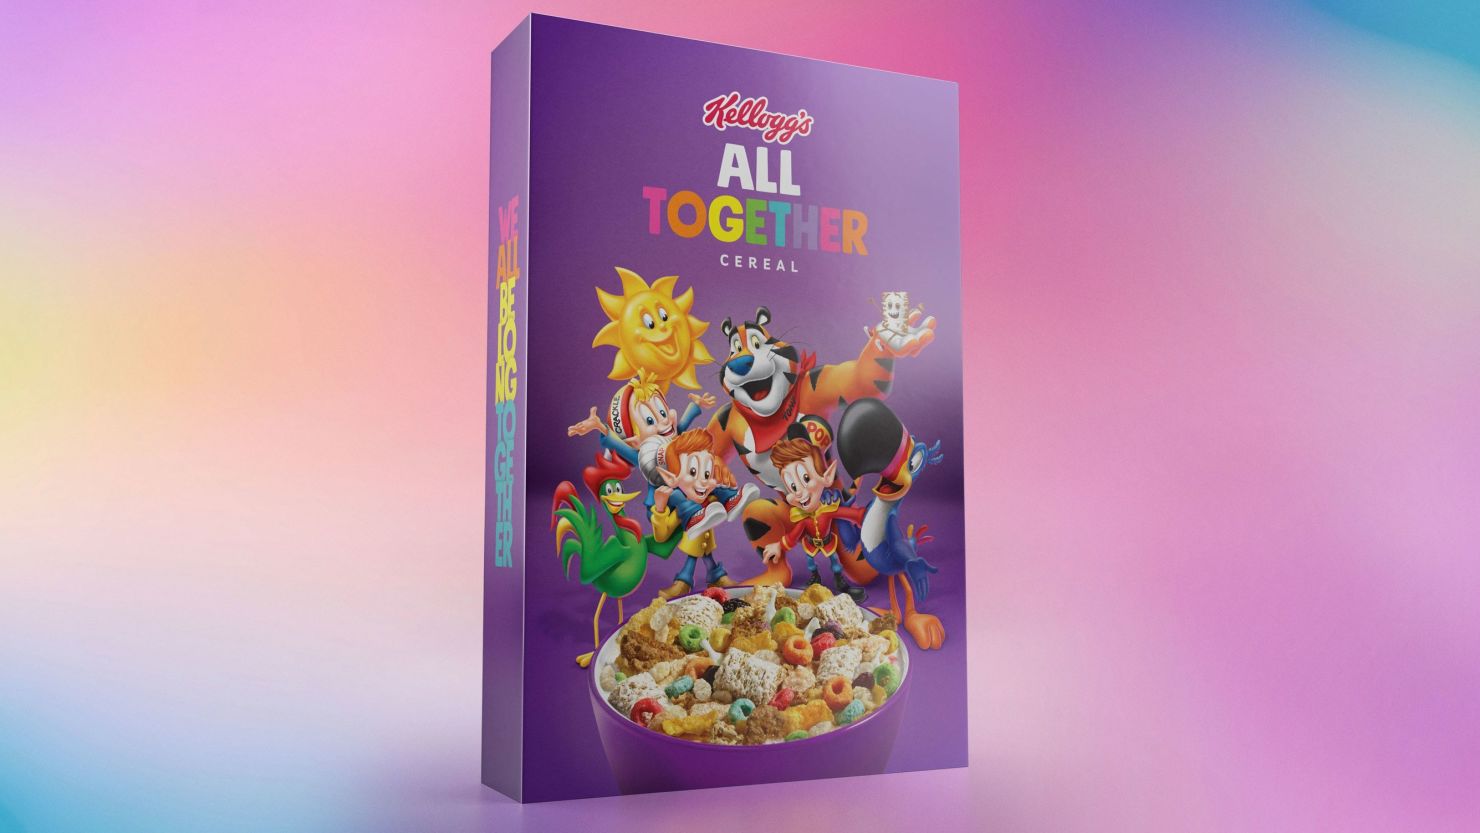 Kellogg's All Together cereal mixes popular cereals and their mascots.